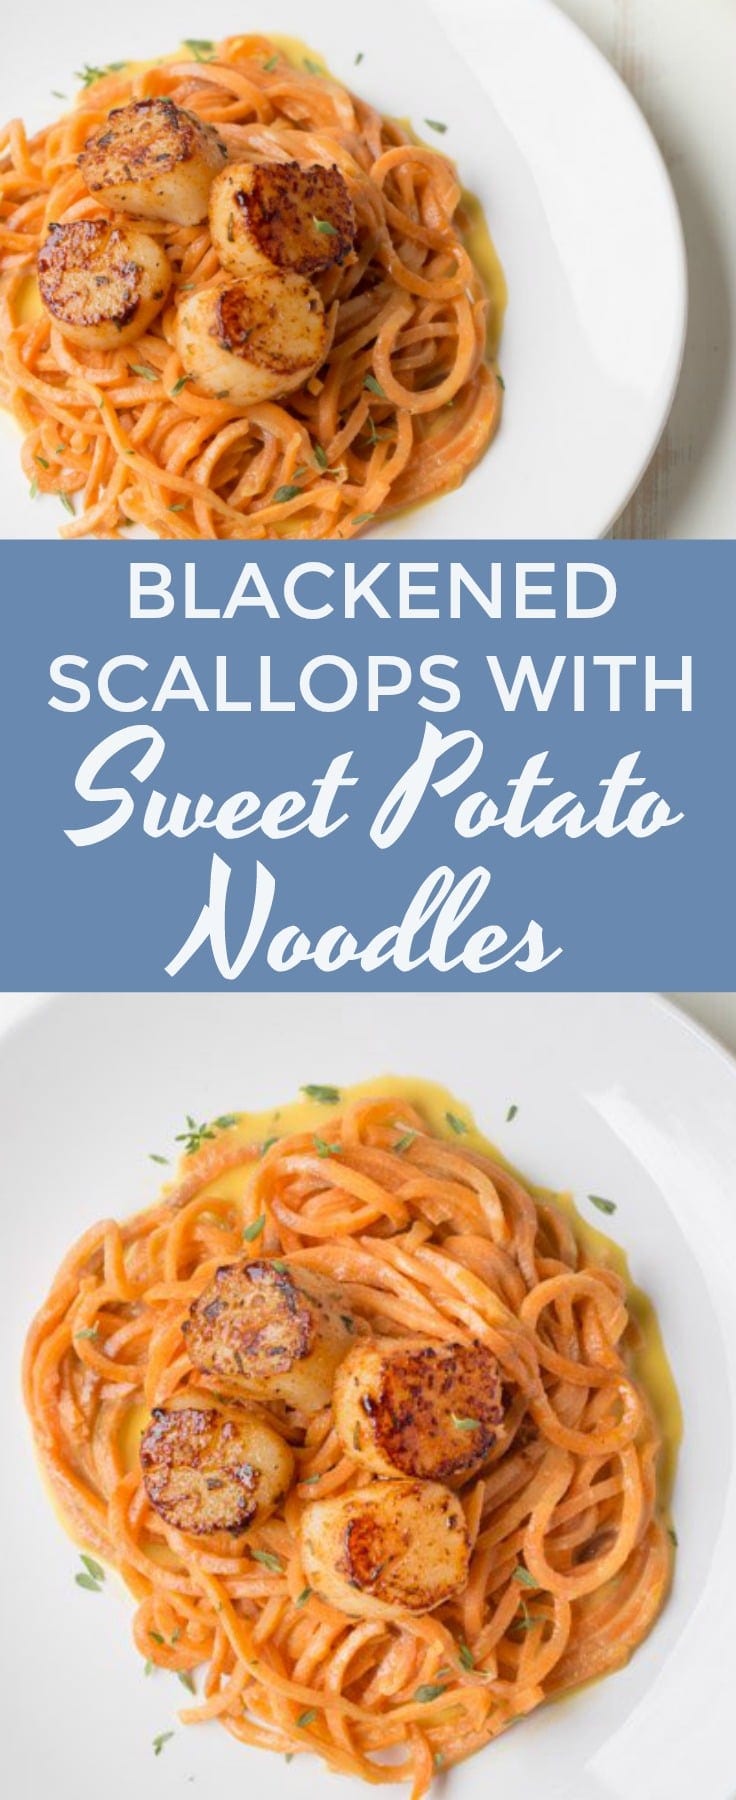 Whole 30, healthy and delicious Blackened Scallops with Sweet Potato Noodles. #whole30 #paleo #healthy #scallops #seafood #recipe #dinner #sweet potato